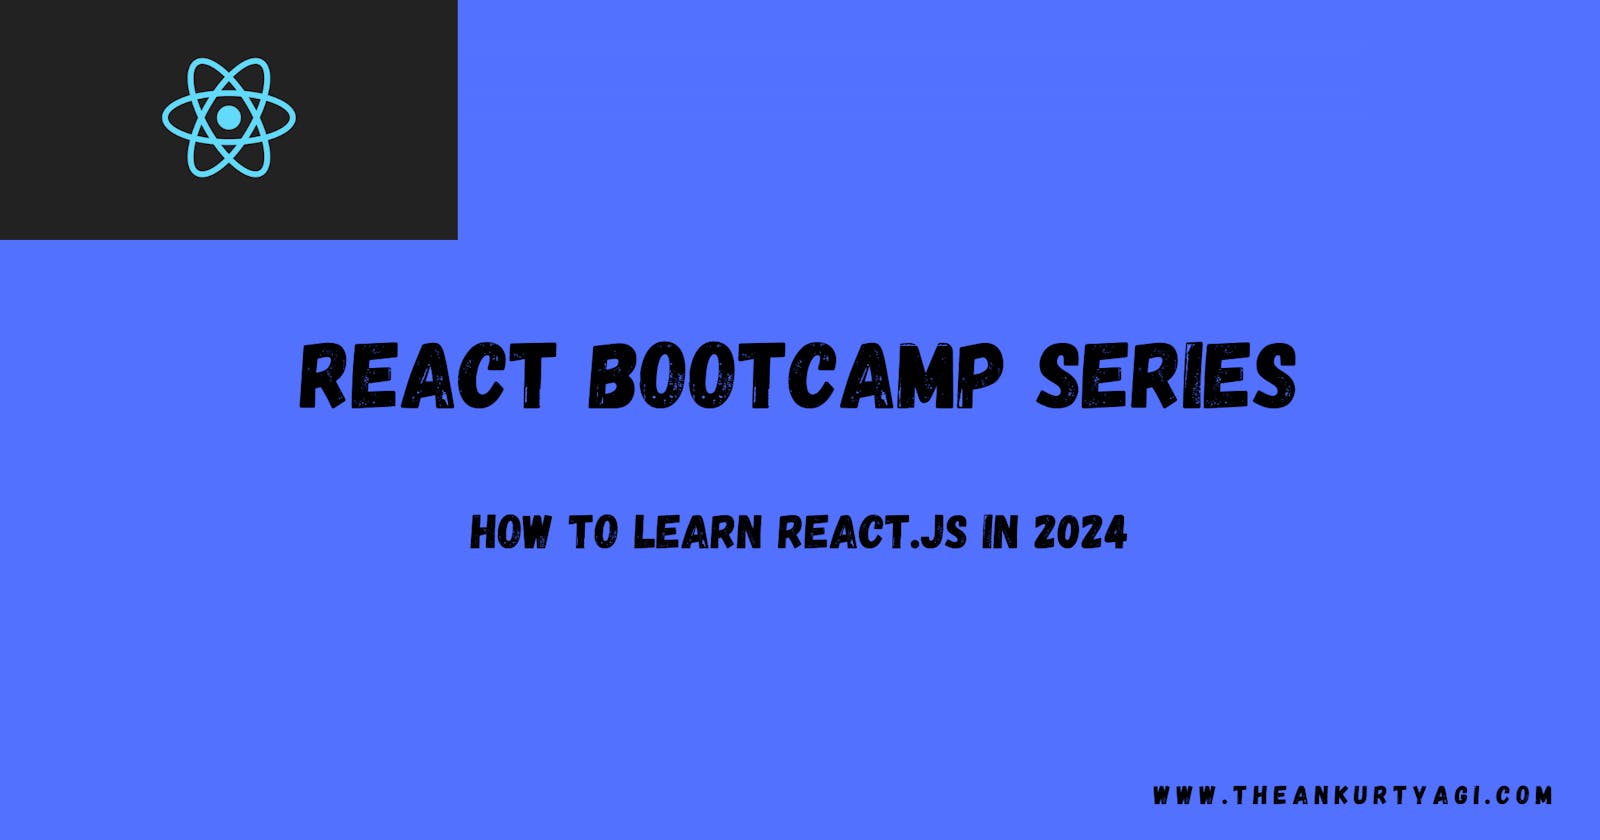 Why React and How to Learn ReactJS in 2024